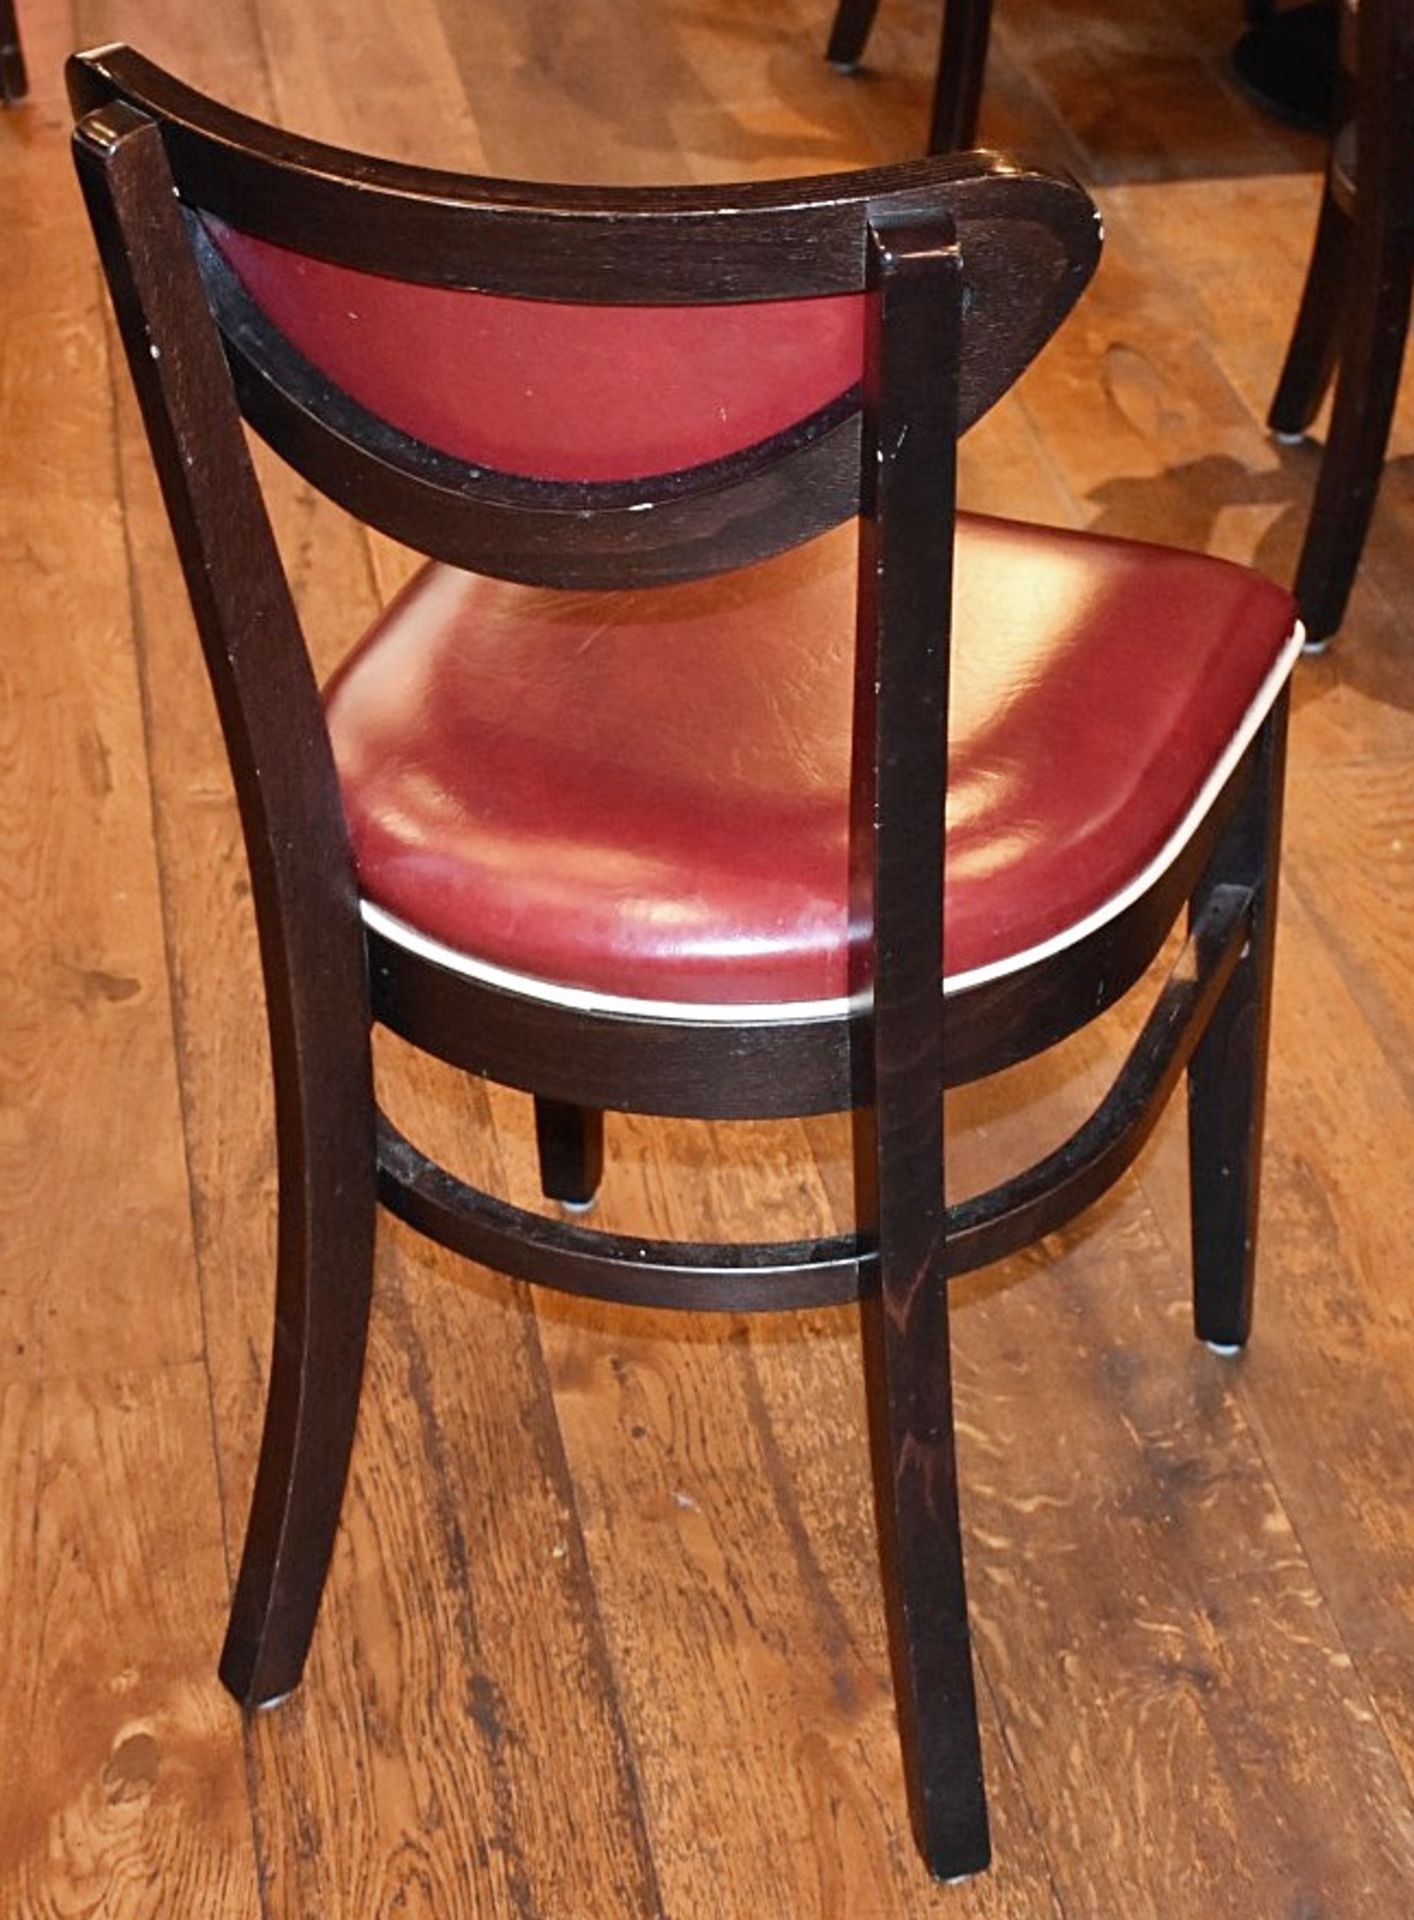 4 x Wine Red Faux Leather Dining Chairs From Italian American Restaurant - Retro Design With Dark - Image 3 of 4